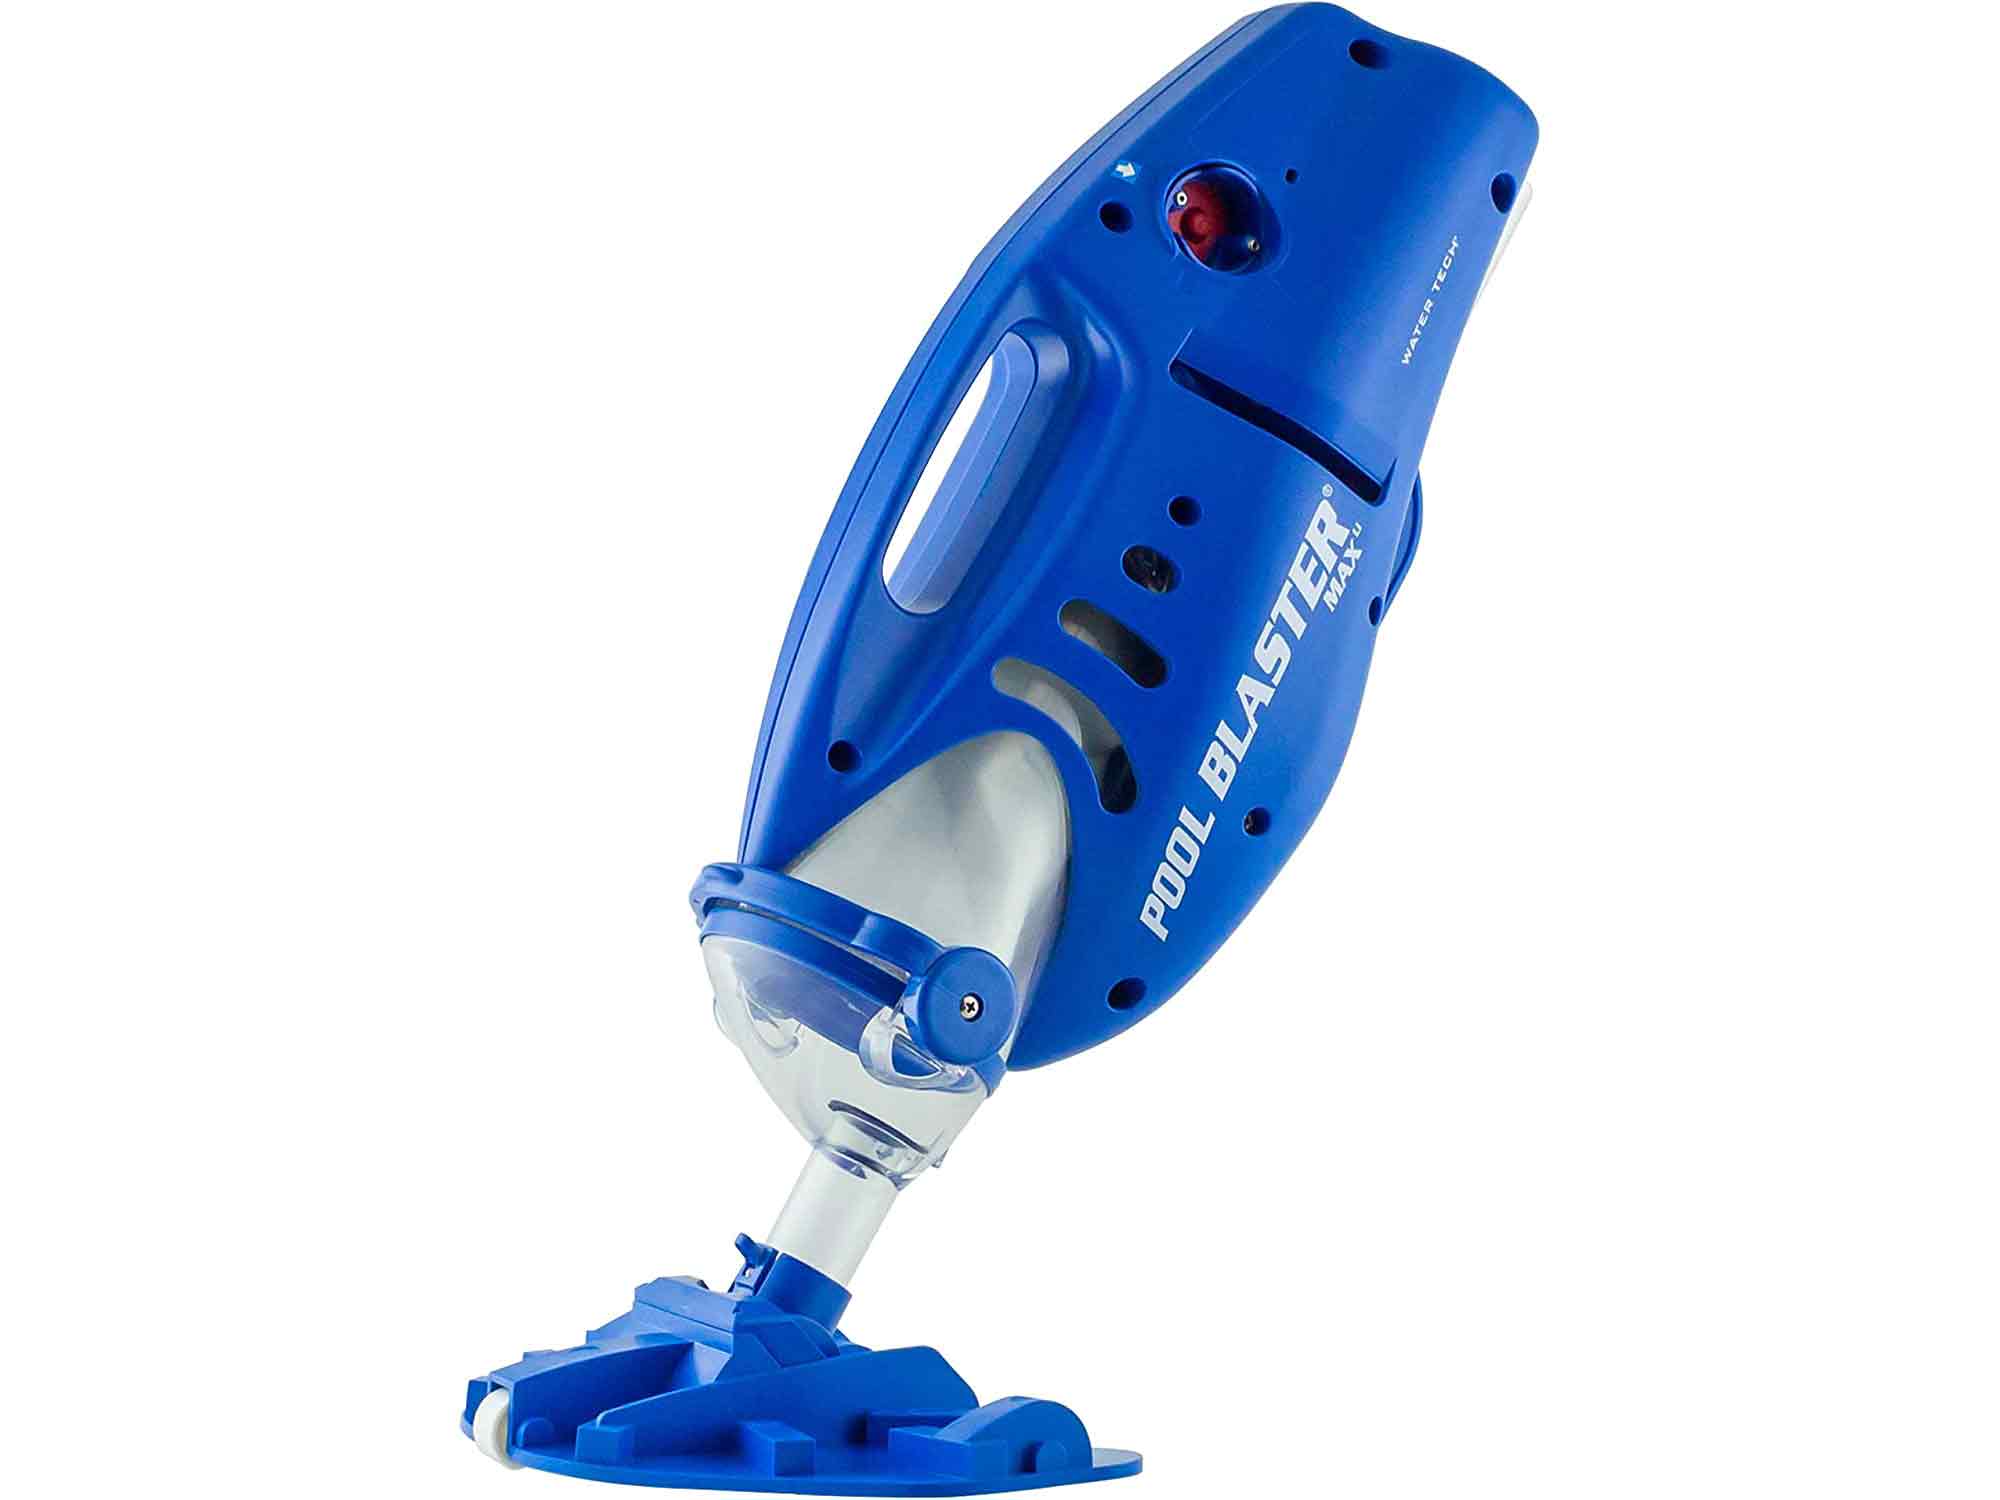 Pool Blaster Max Cordless Pool Vacuum for Deep Cleaning & Strong Suction